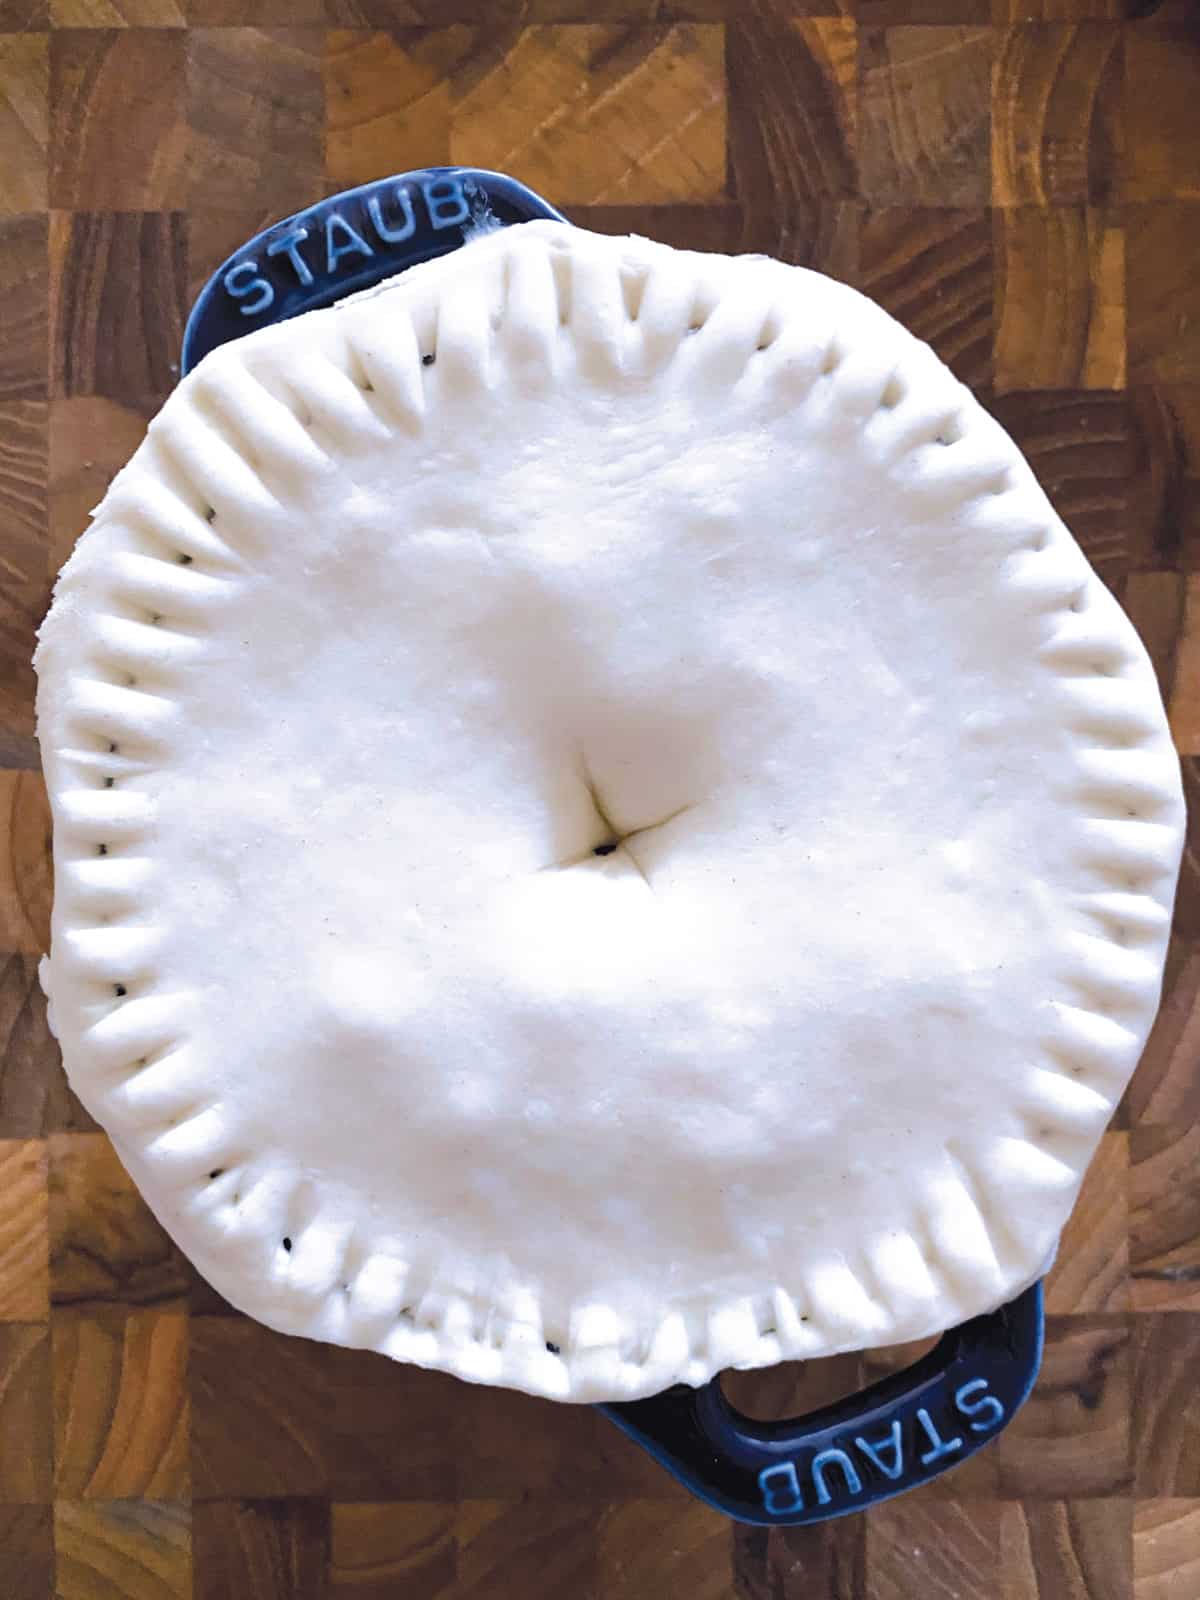 A mini pie with puff pastry on a cutting board.